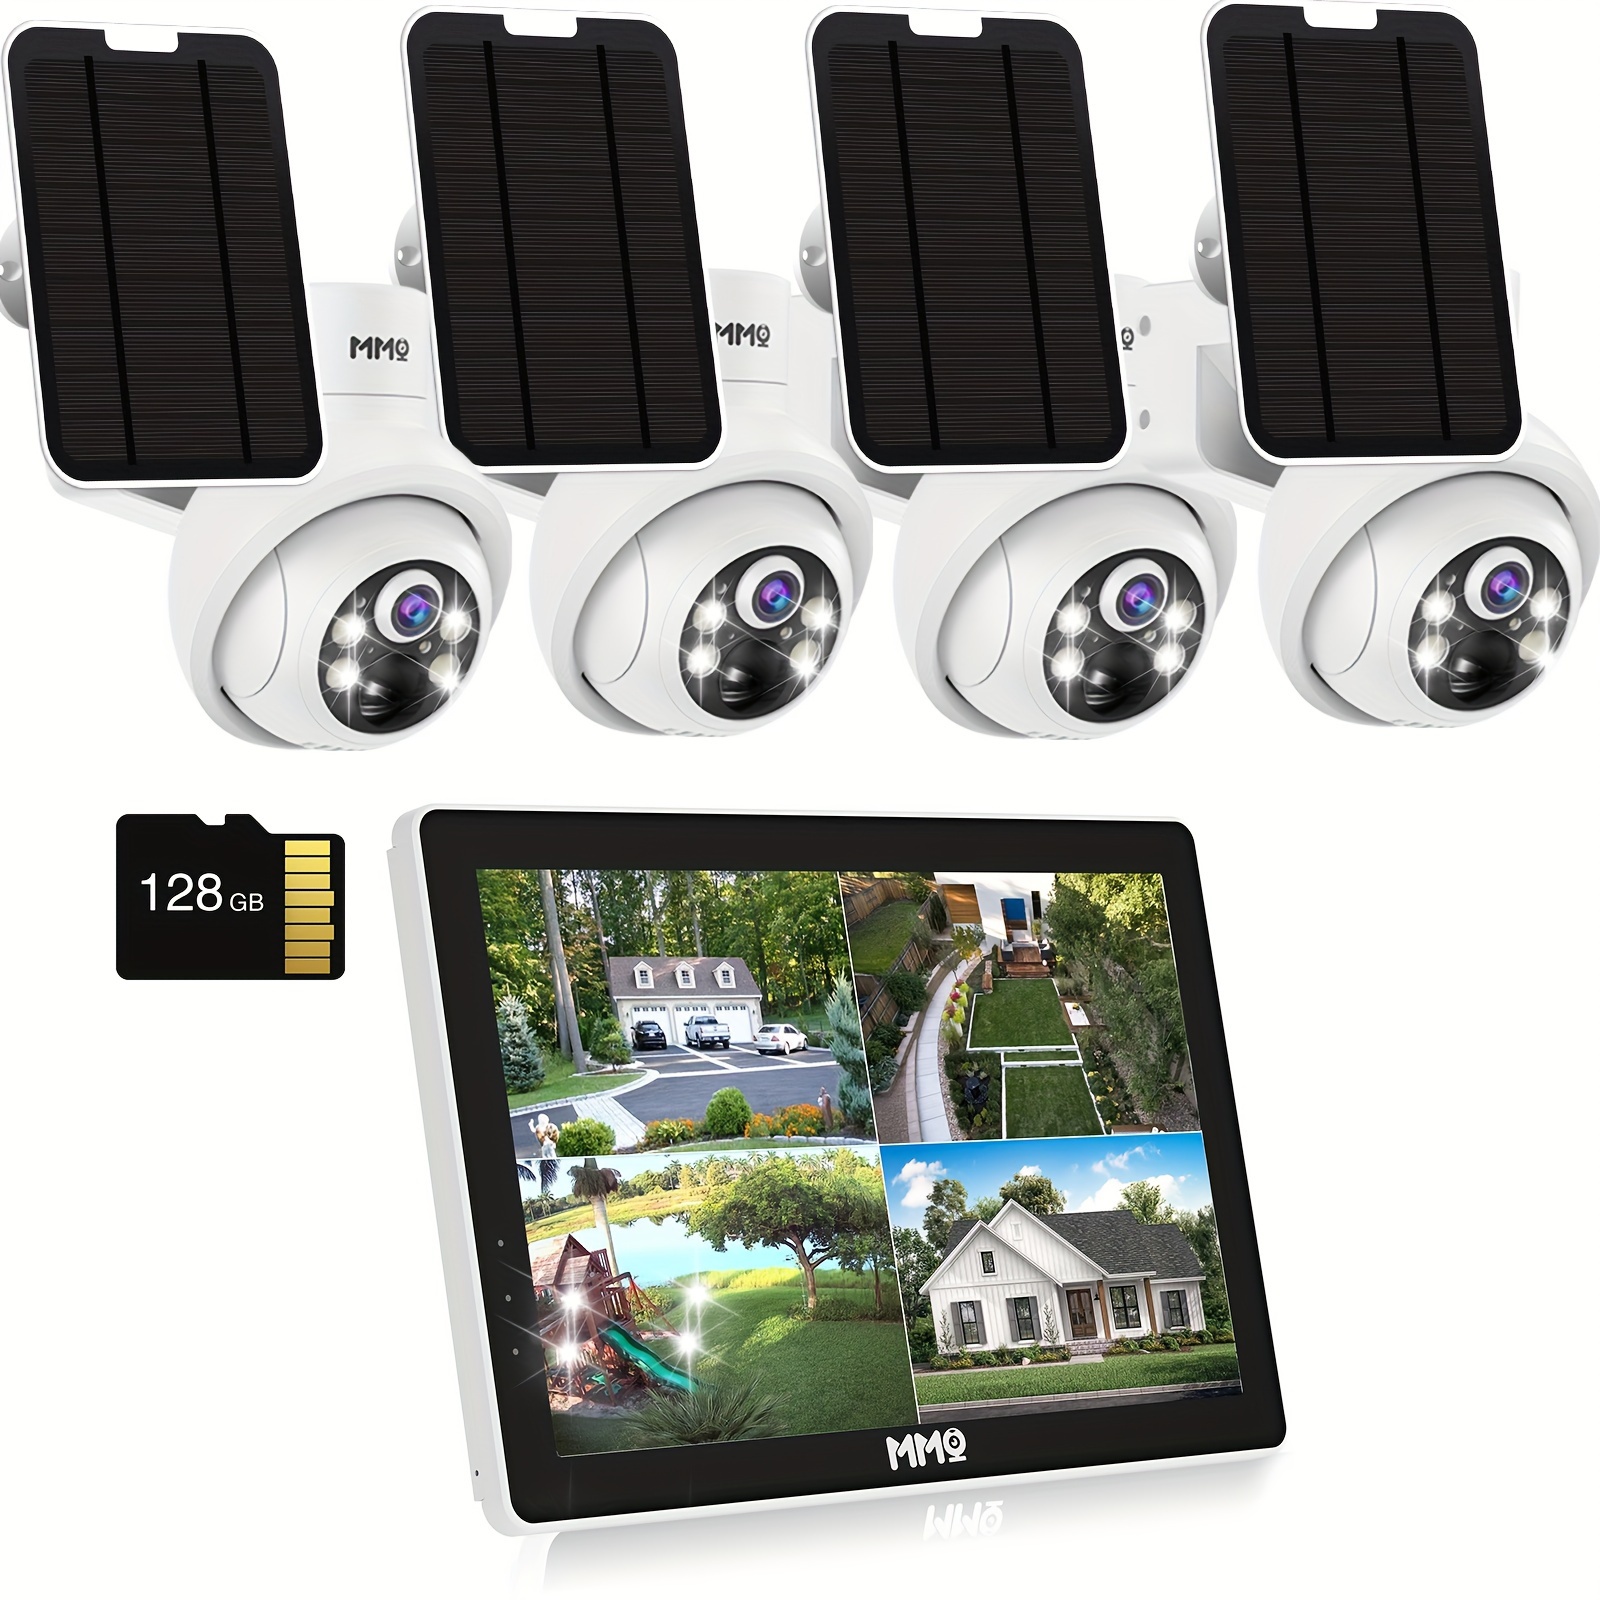 

Solar Security Cameras Wireless Outdoor With Lcd Monitor, 2k Home Security System, 4 Cameras Kit With 360 View, Pir Motion, Spotlight Camera, 128g Local Storage, No Monthly Fee